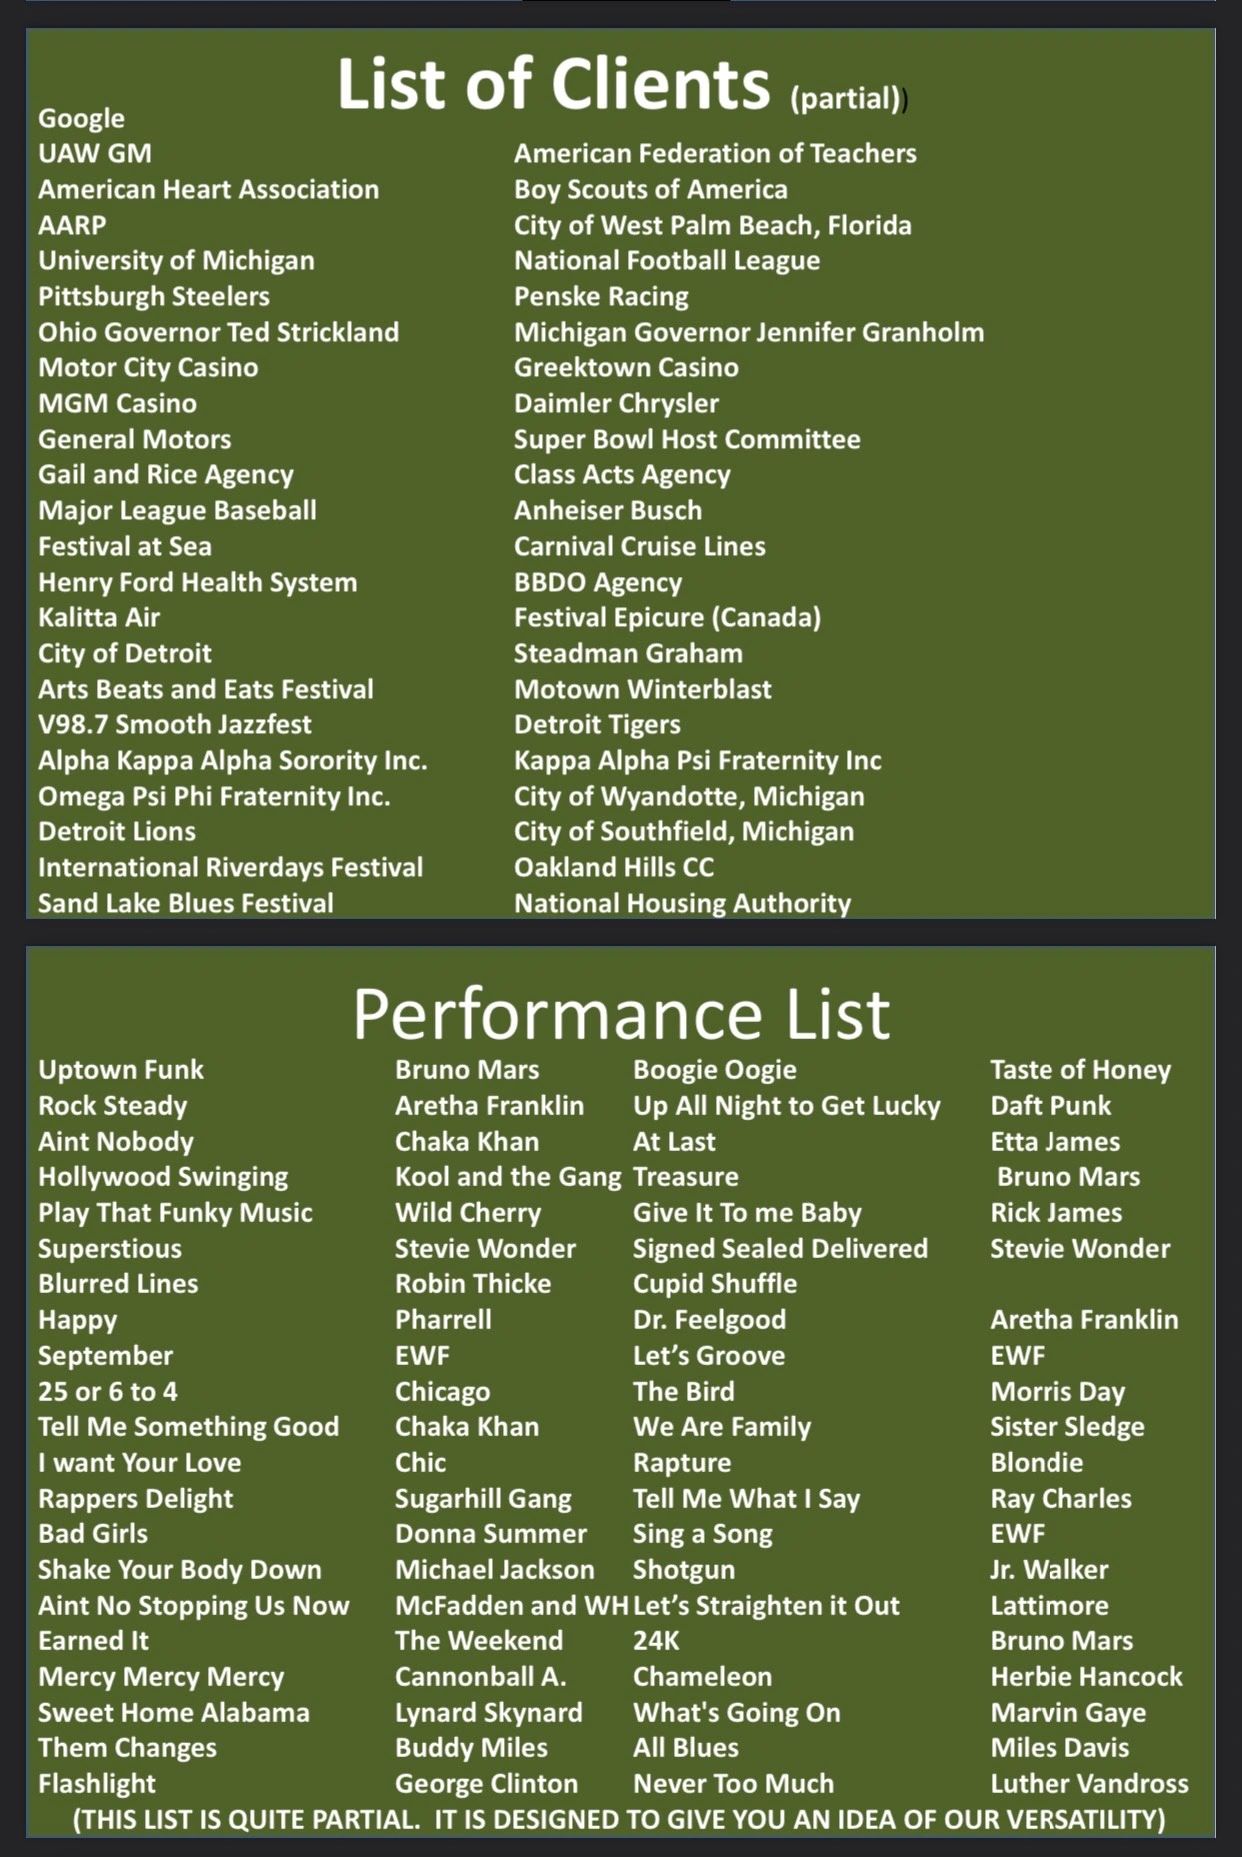 List of Clients and Performances